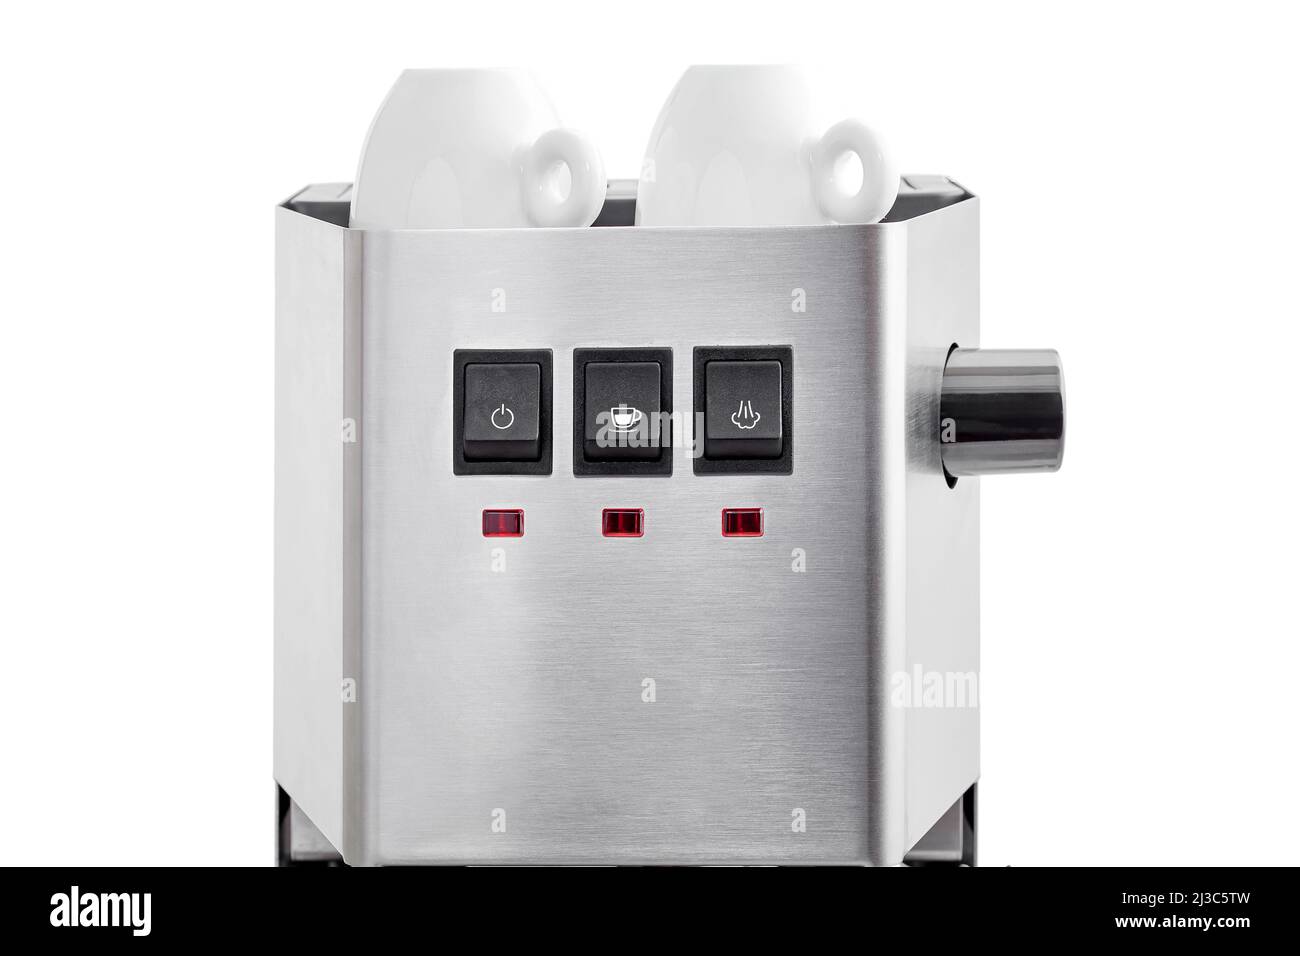 2 ceramic white espresso cups stand on warming top of a coffee machine, a steel coffee maker and black home appliance control buttons with icons and l Stock Photo